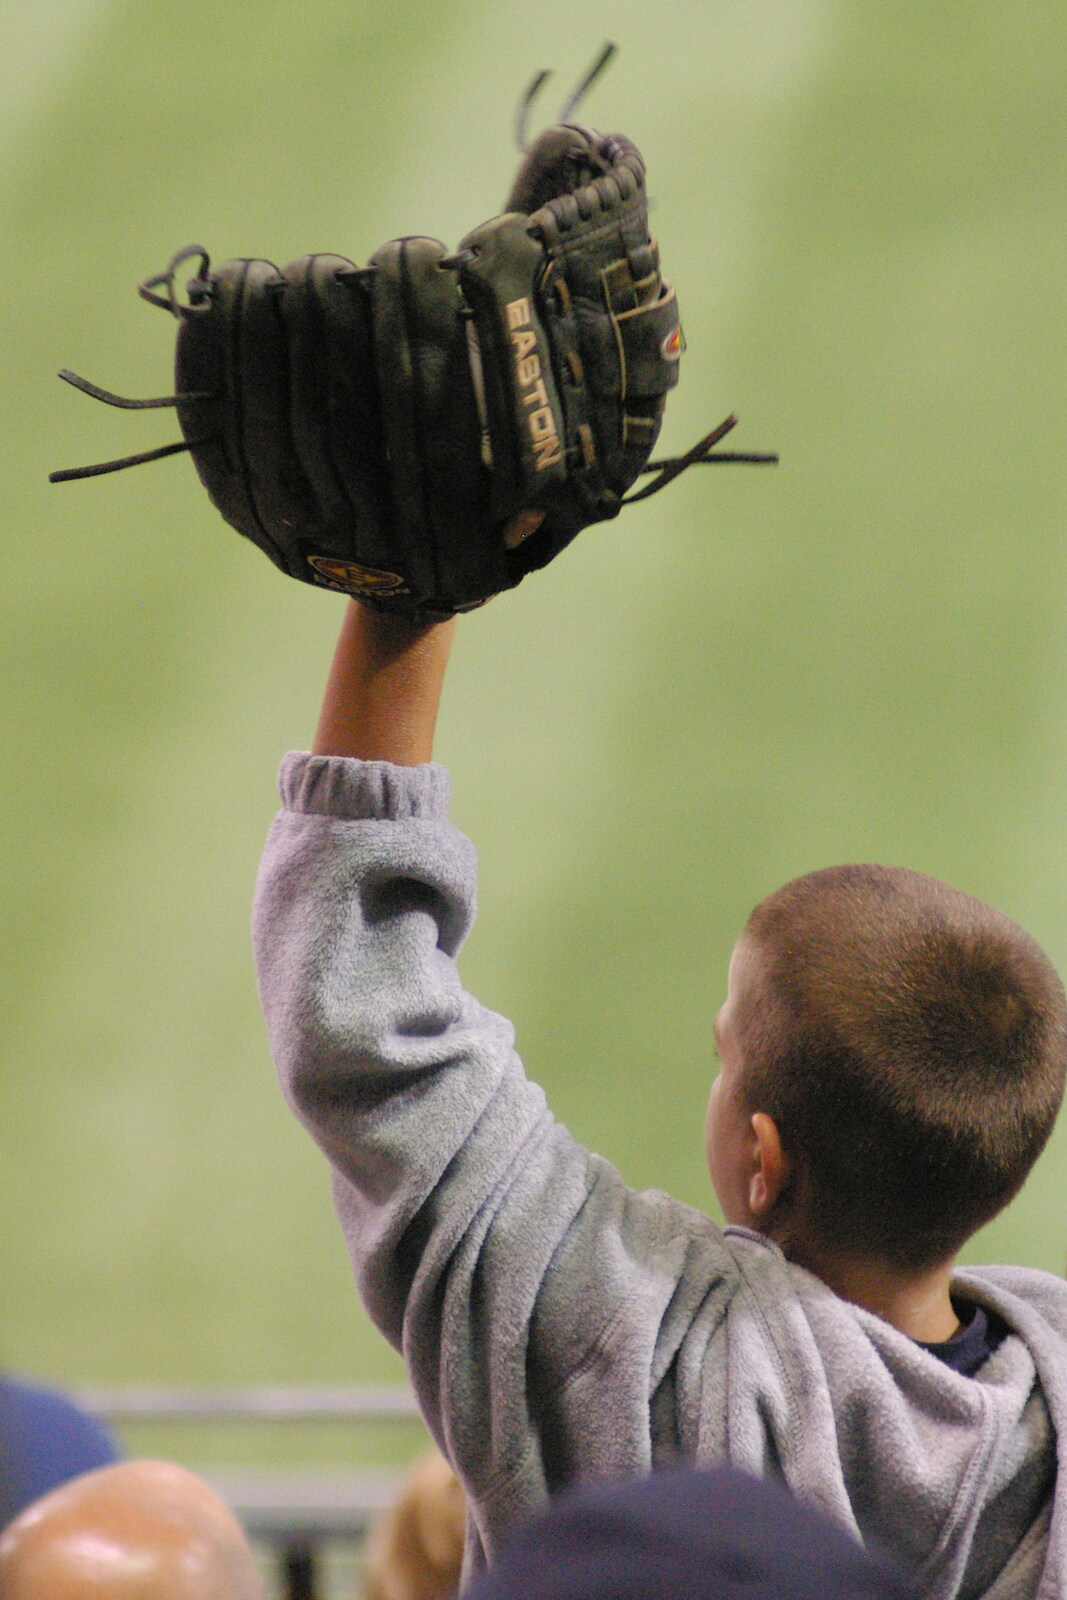 A boy has brought his own catcher's mitt along from The Padres at Petco Park: a Baseball Game, San Diego, California - 31st May 2005